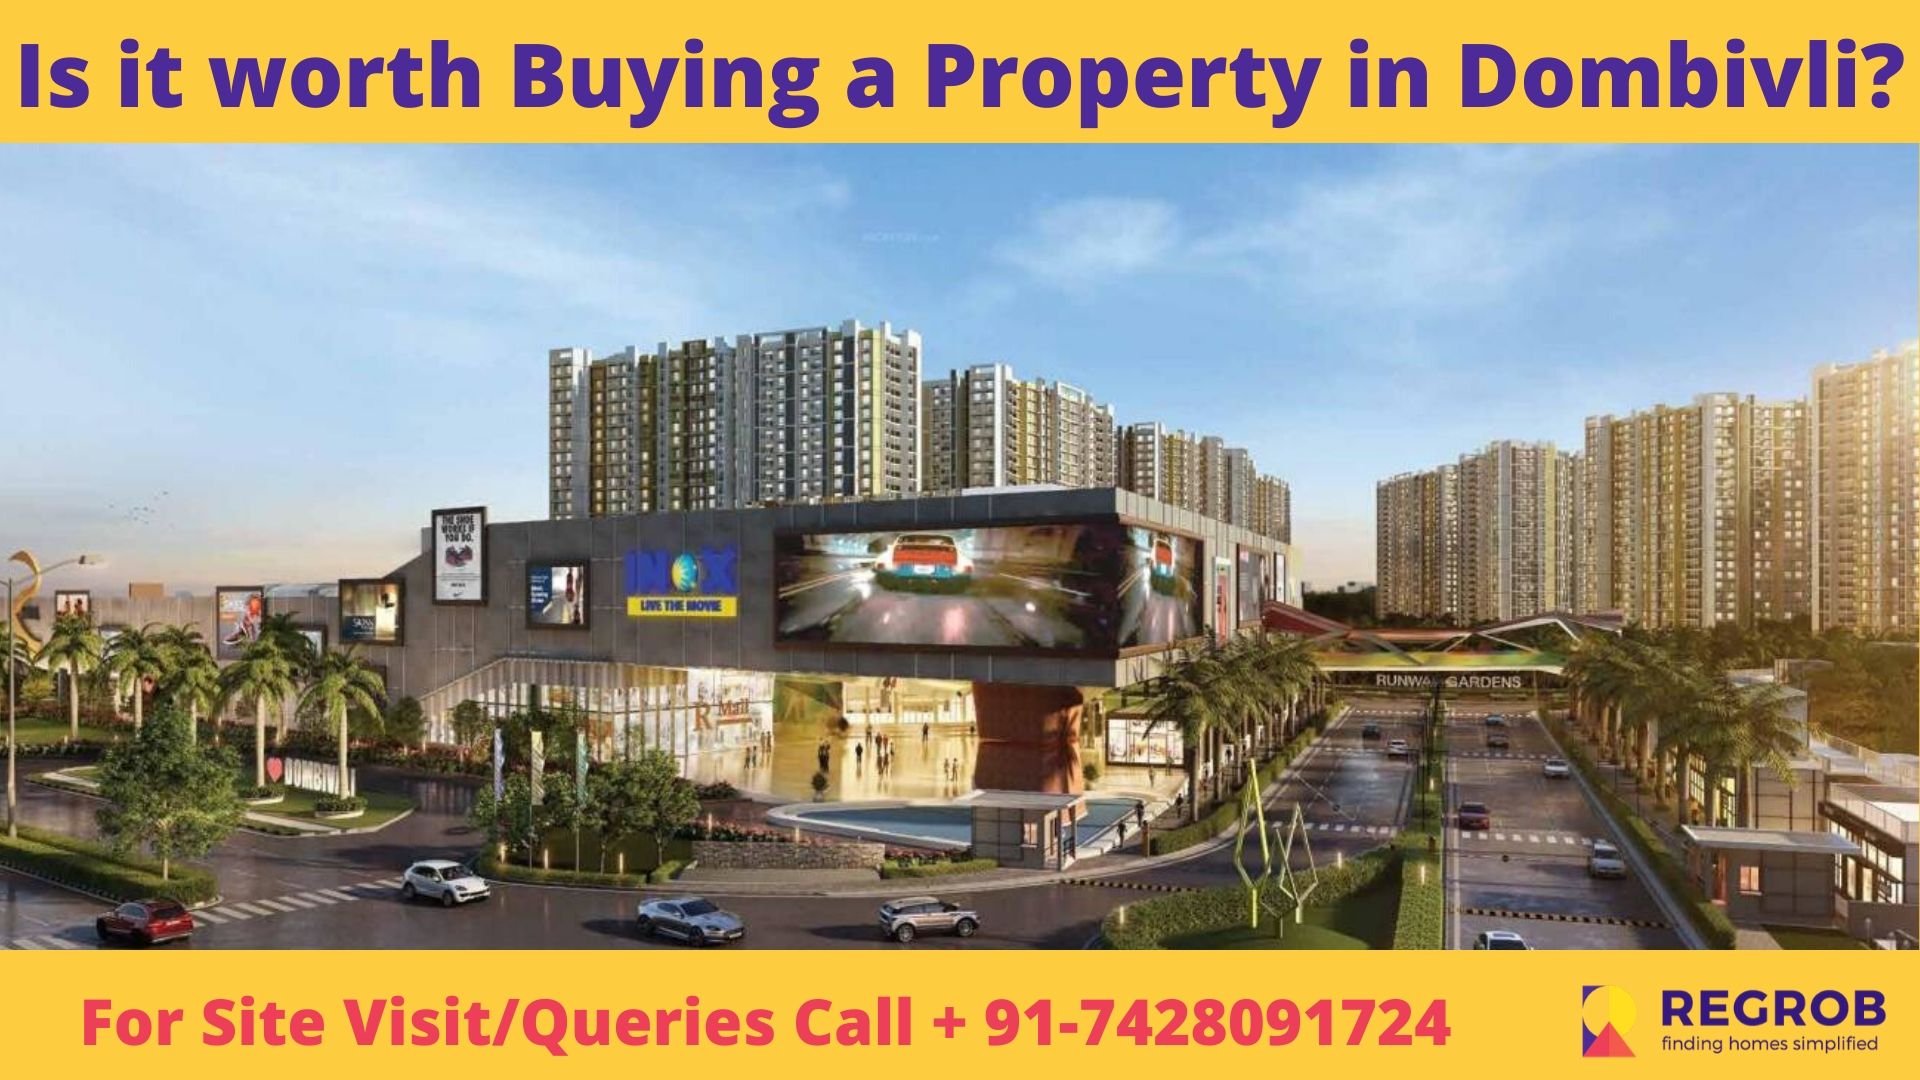 Is it worth Buying a Property in Dombivli, Mumbai